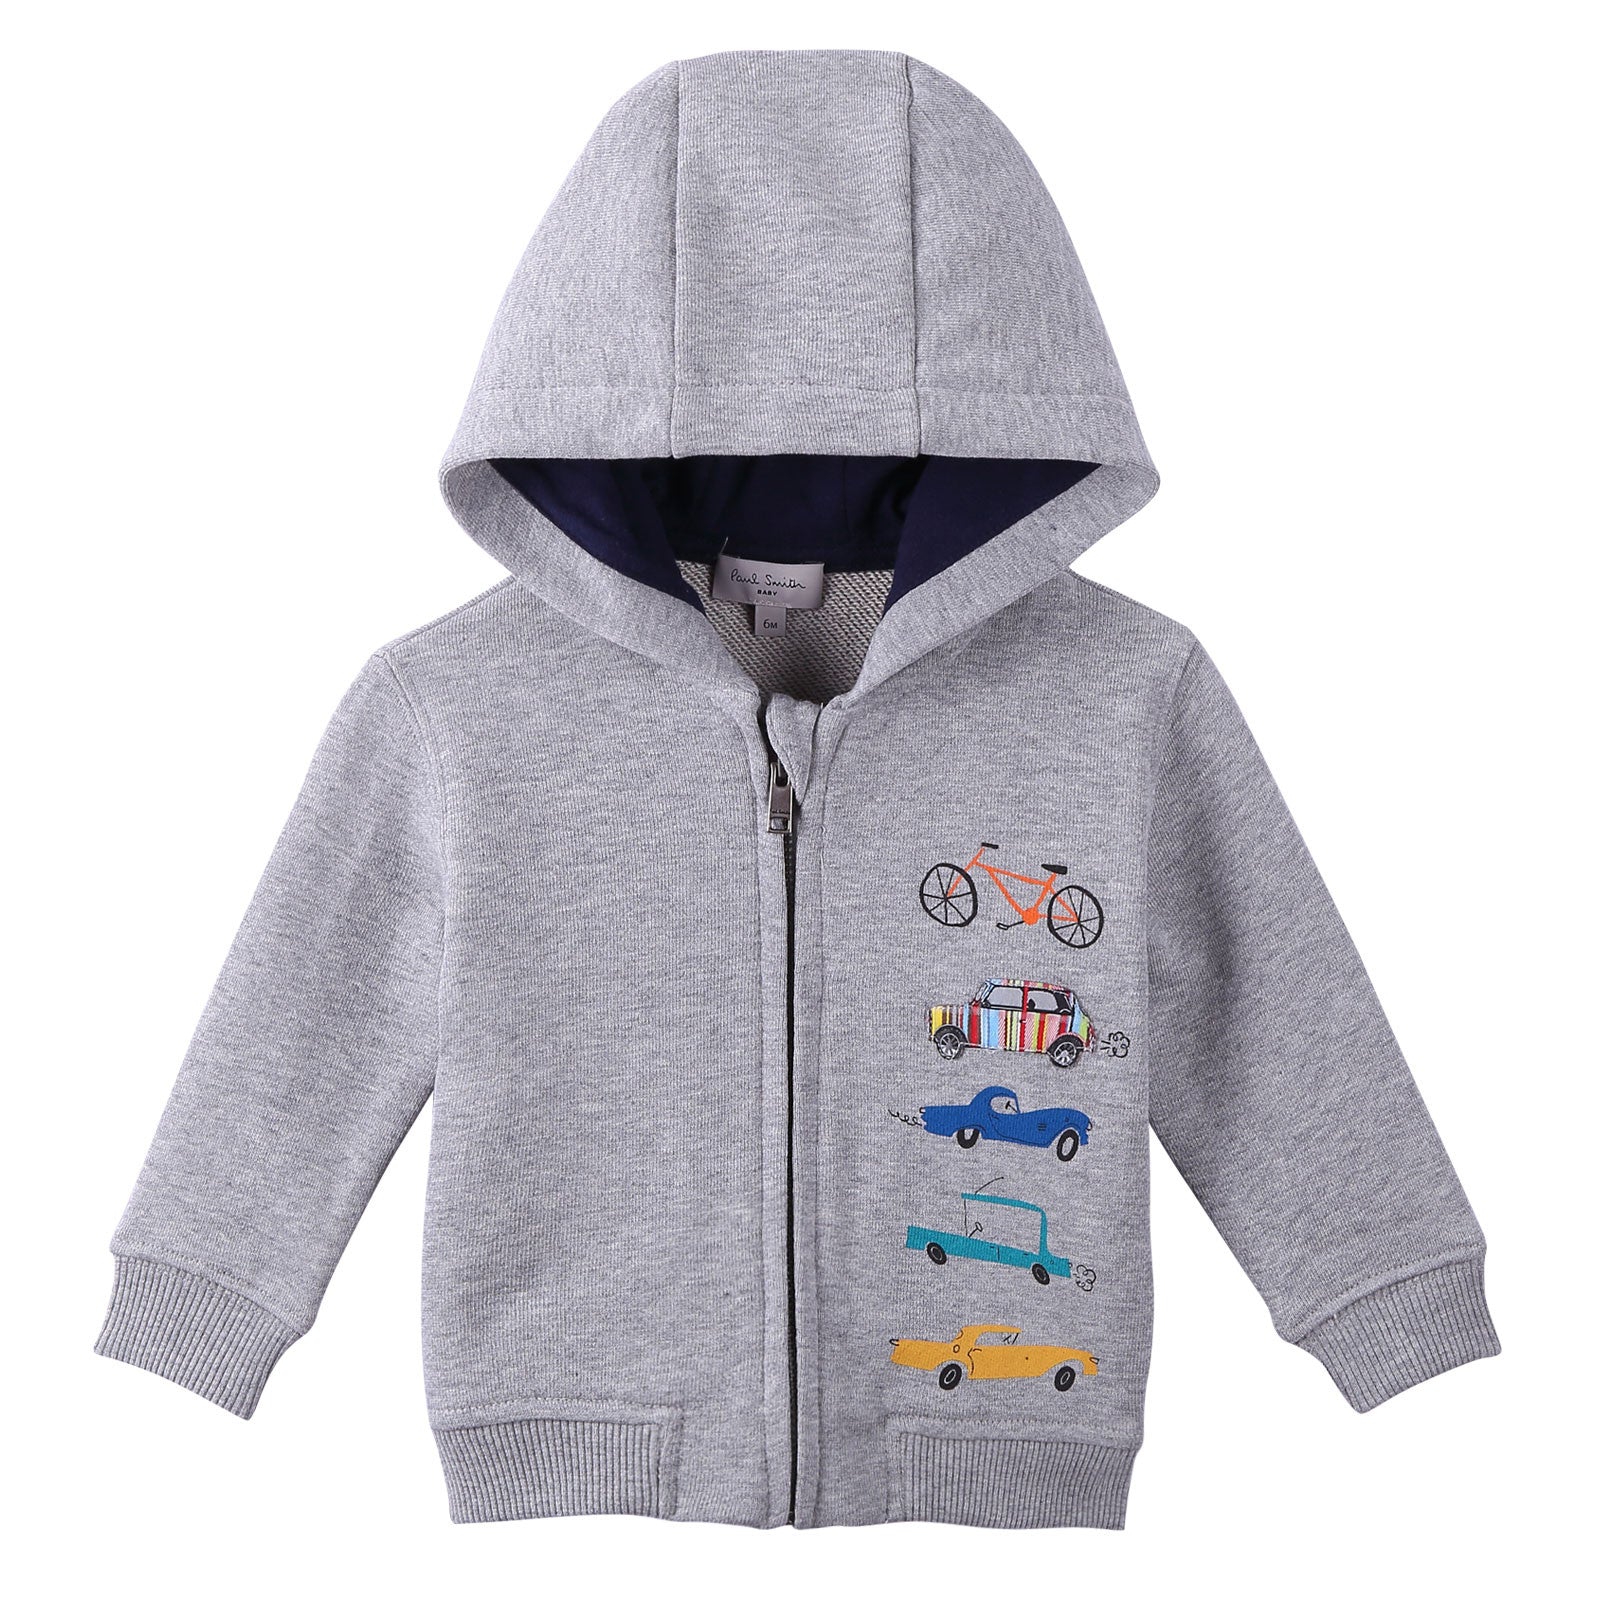 Baby Boys Grey Cotton Car Printed Hooded Zip-Up Top - CÉMAROSE | Children's Fashion Store - 1